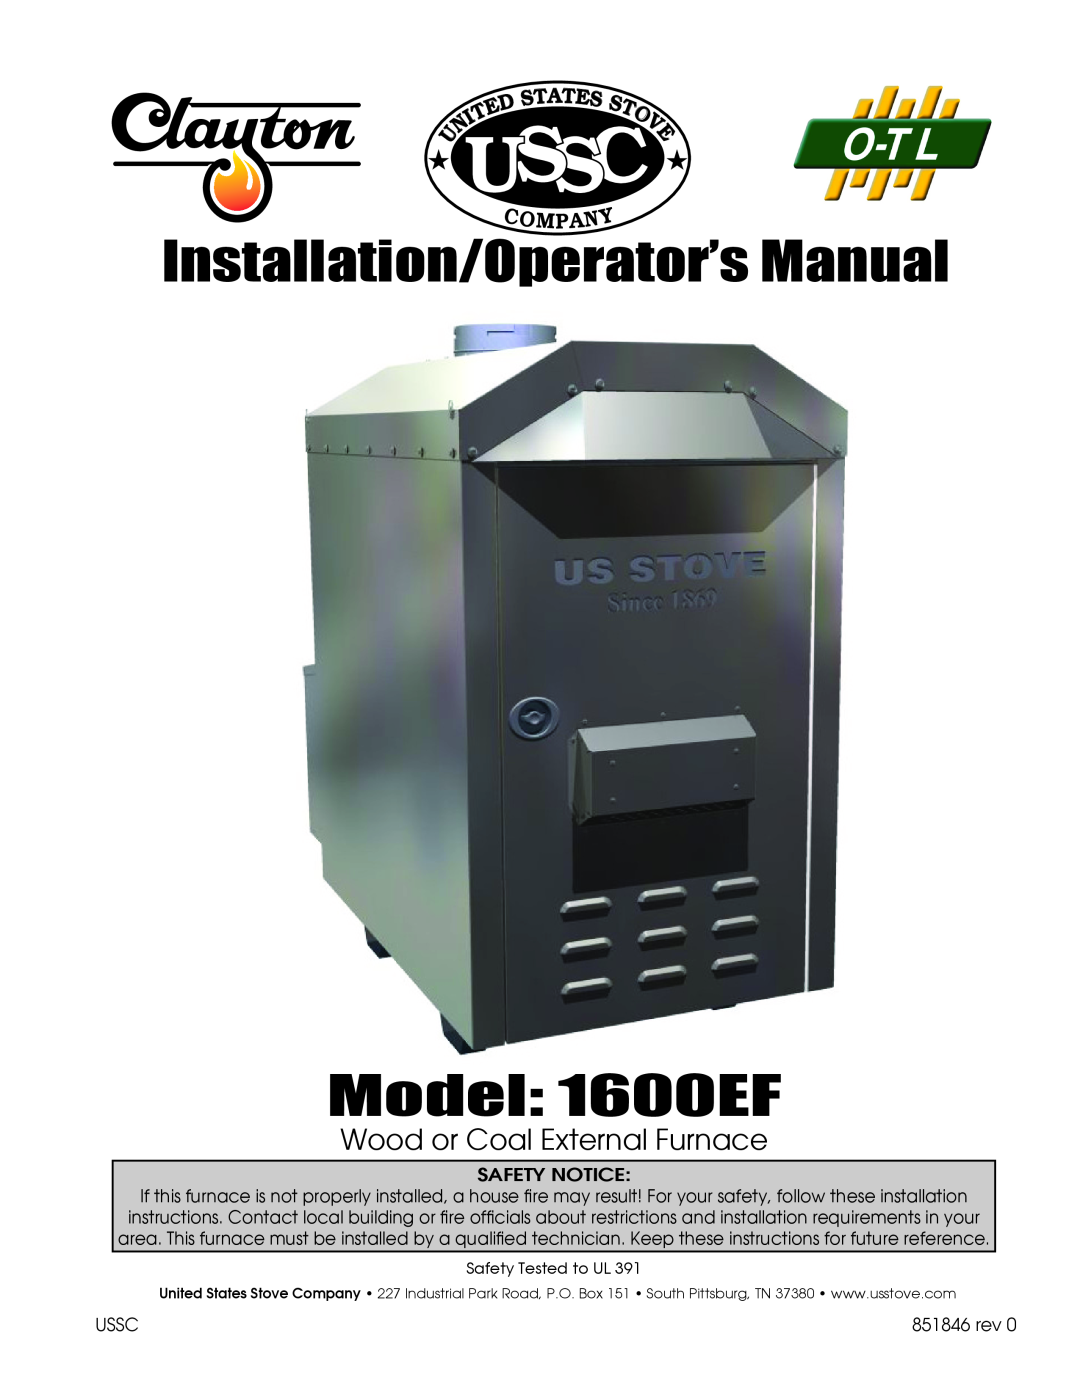 United States Stove 1600EF installation instructions Wood or Coal External Furnace, Ussc, S S 